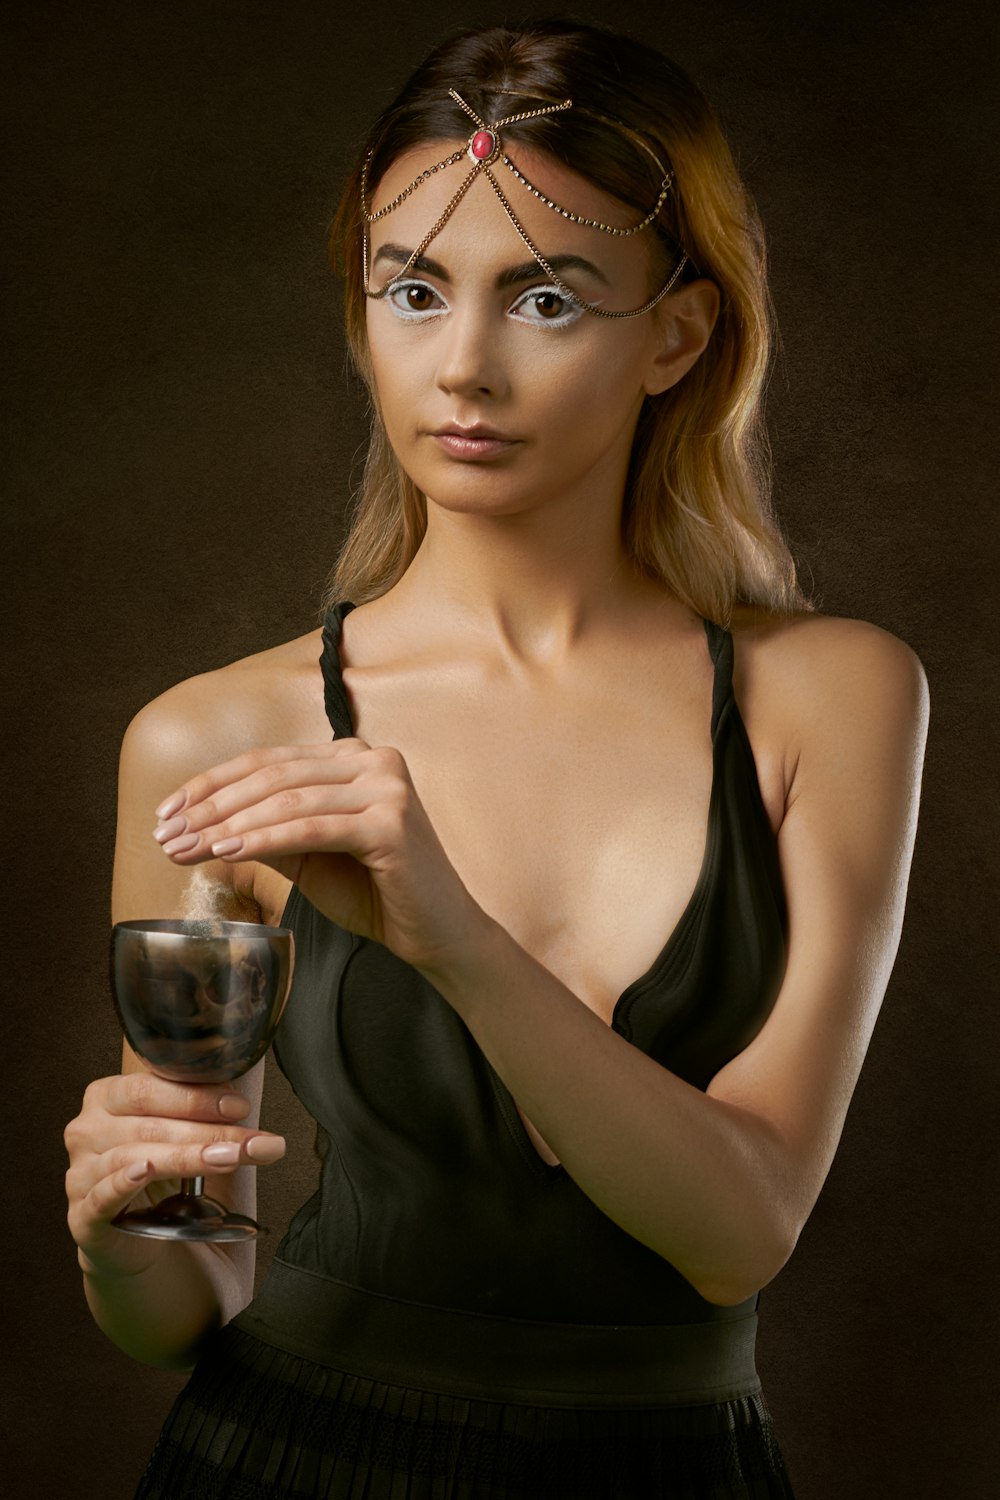 woman standing and holding glass of wine